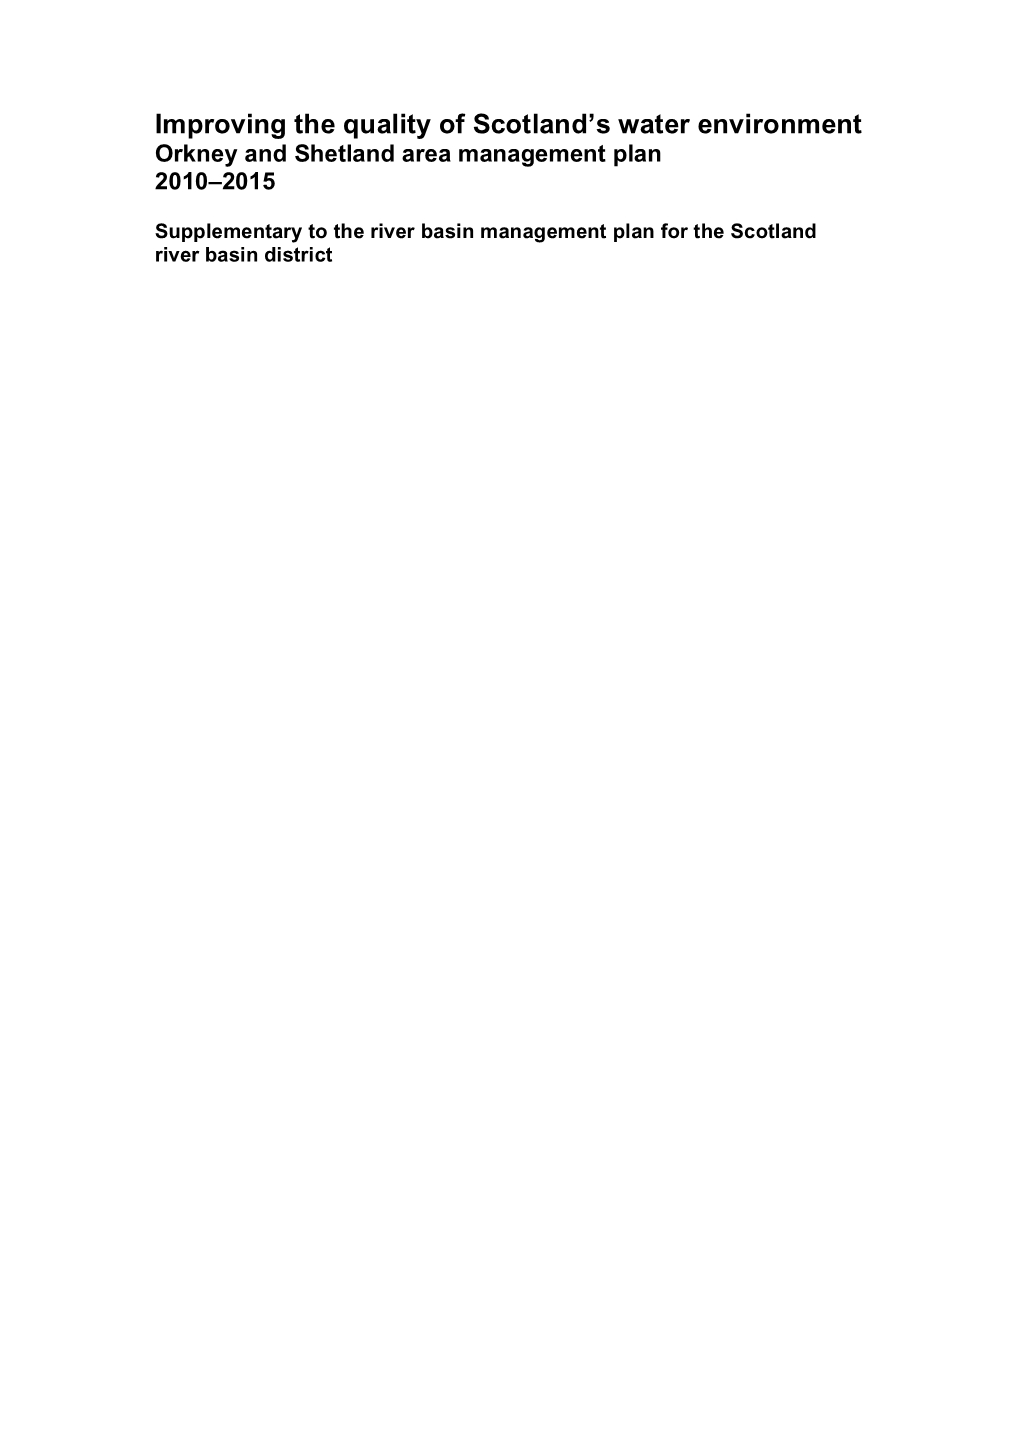 Improving the Quality of Scotland's Water Environment: Orkney and Shetland Area Management Plan 2010